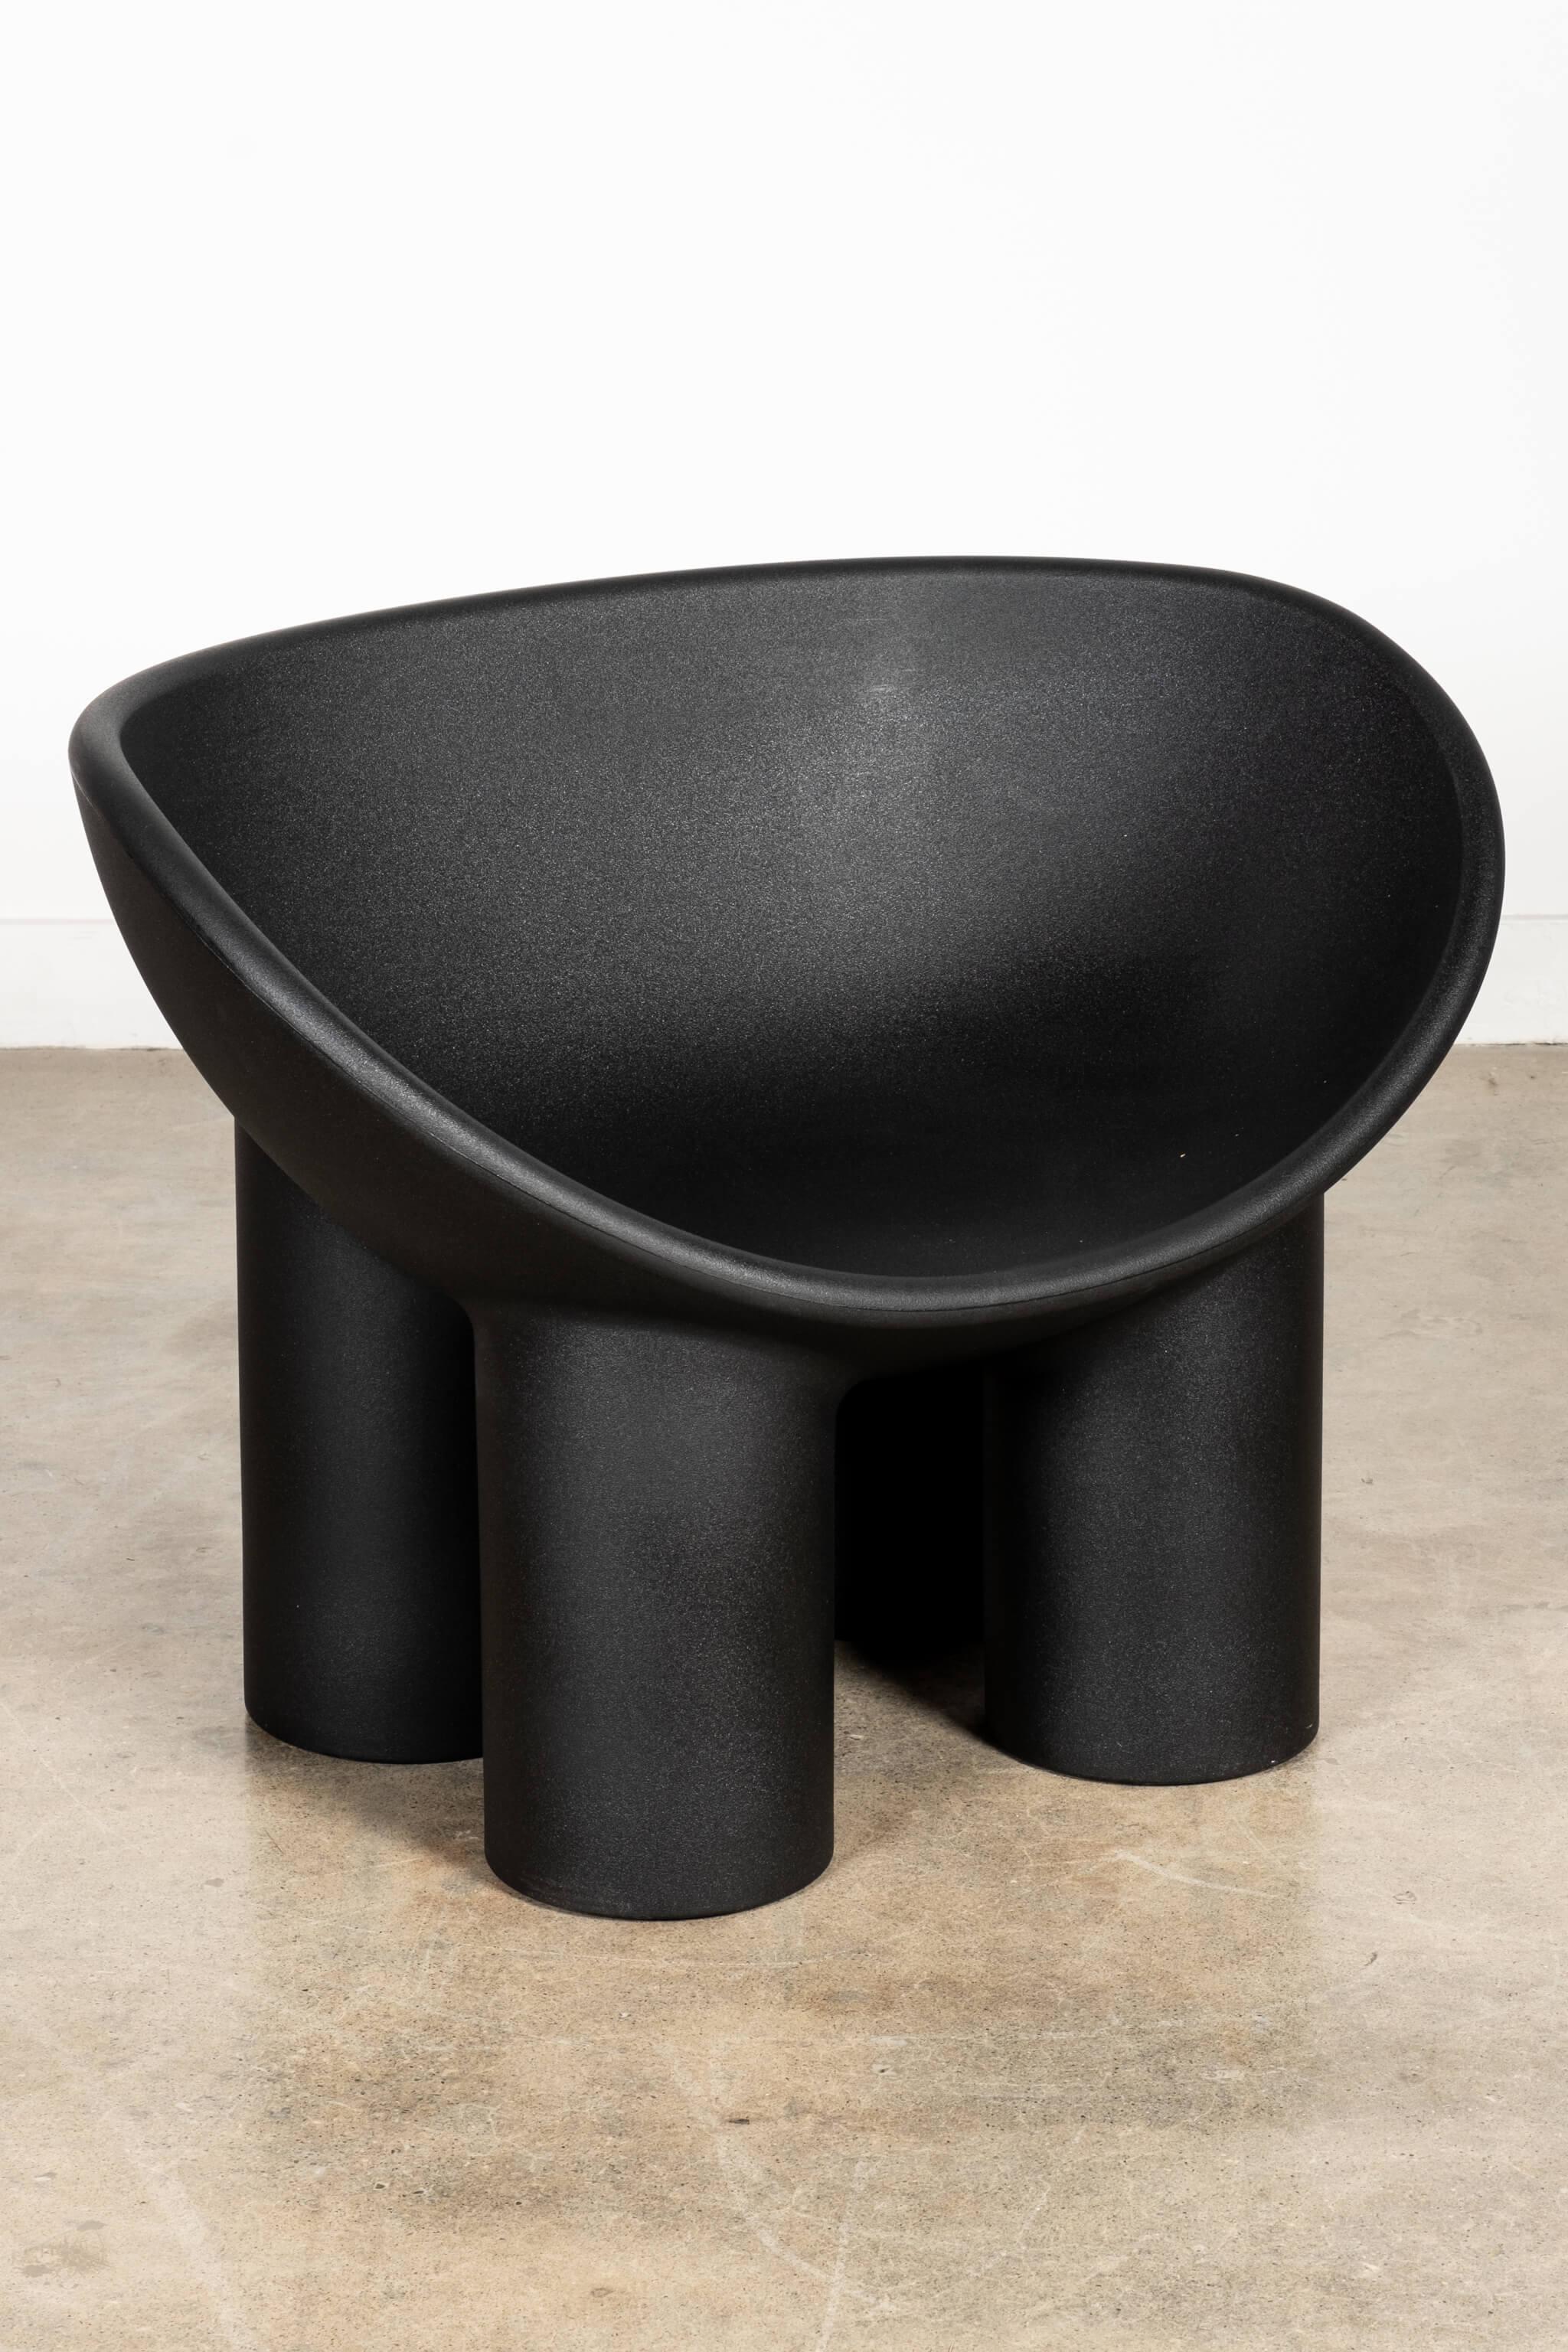 Post-Modern Roly Poly Chair by Faye Toogood for Driade